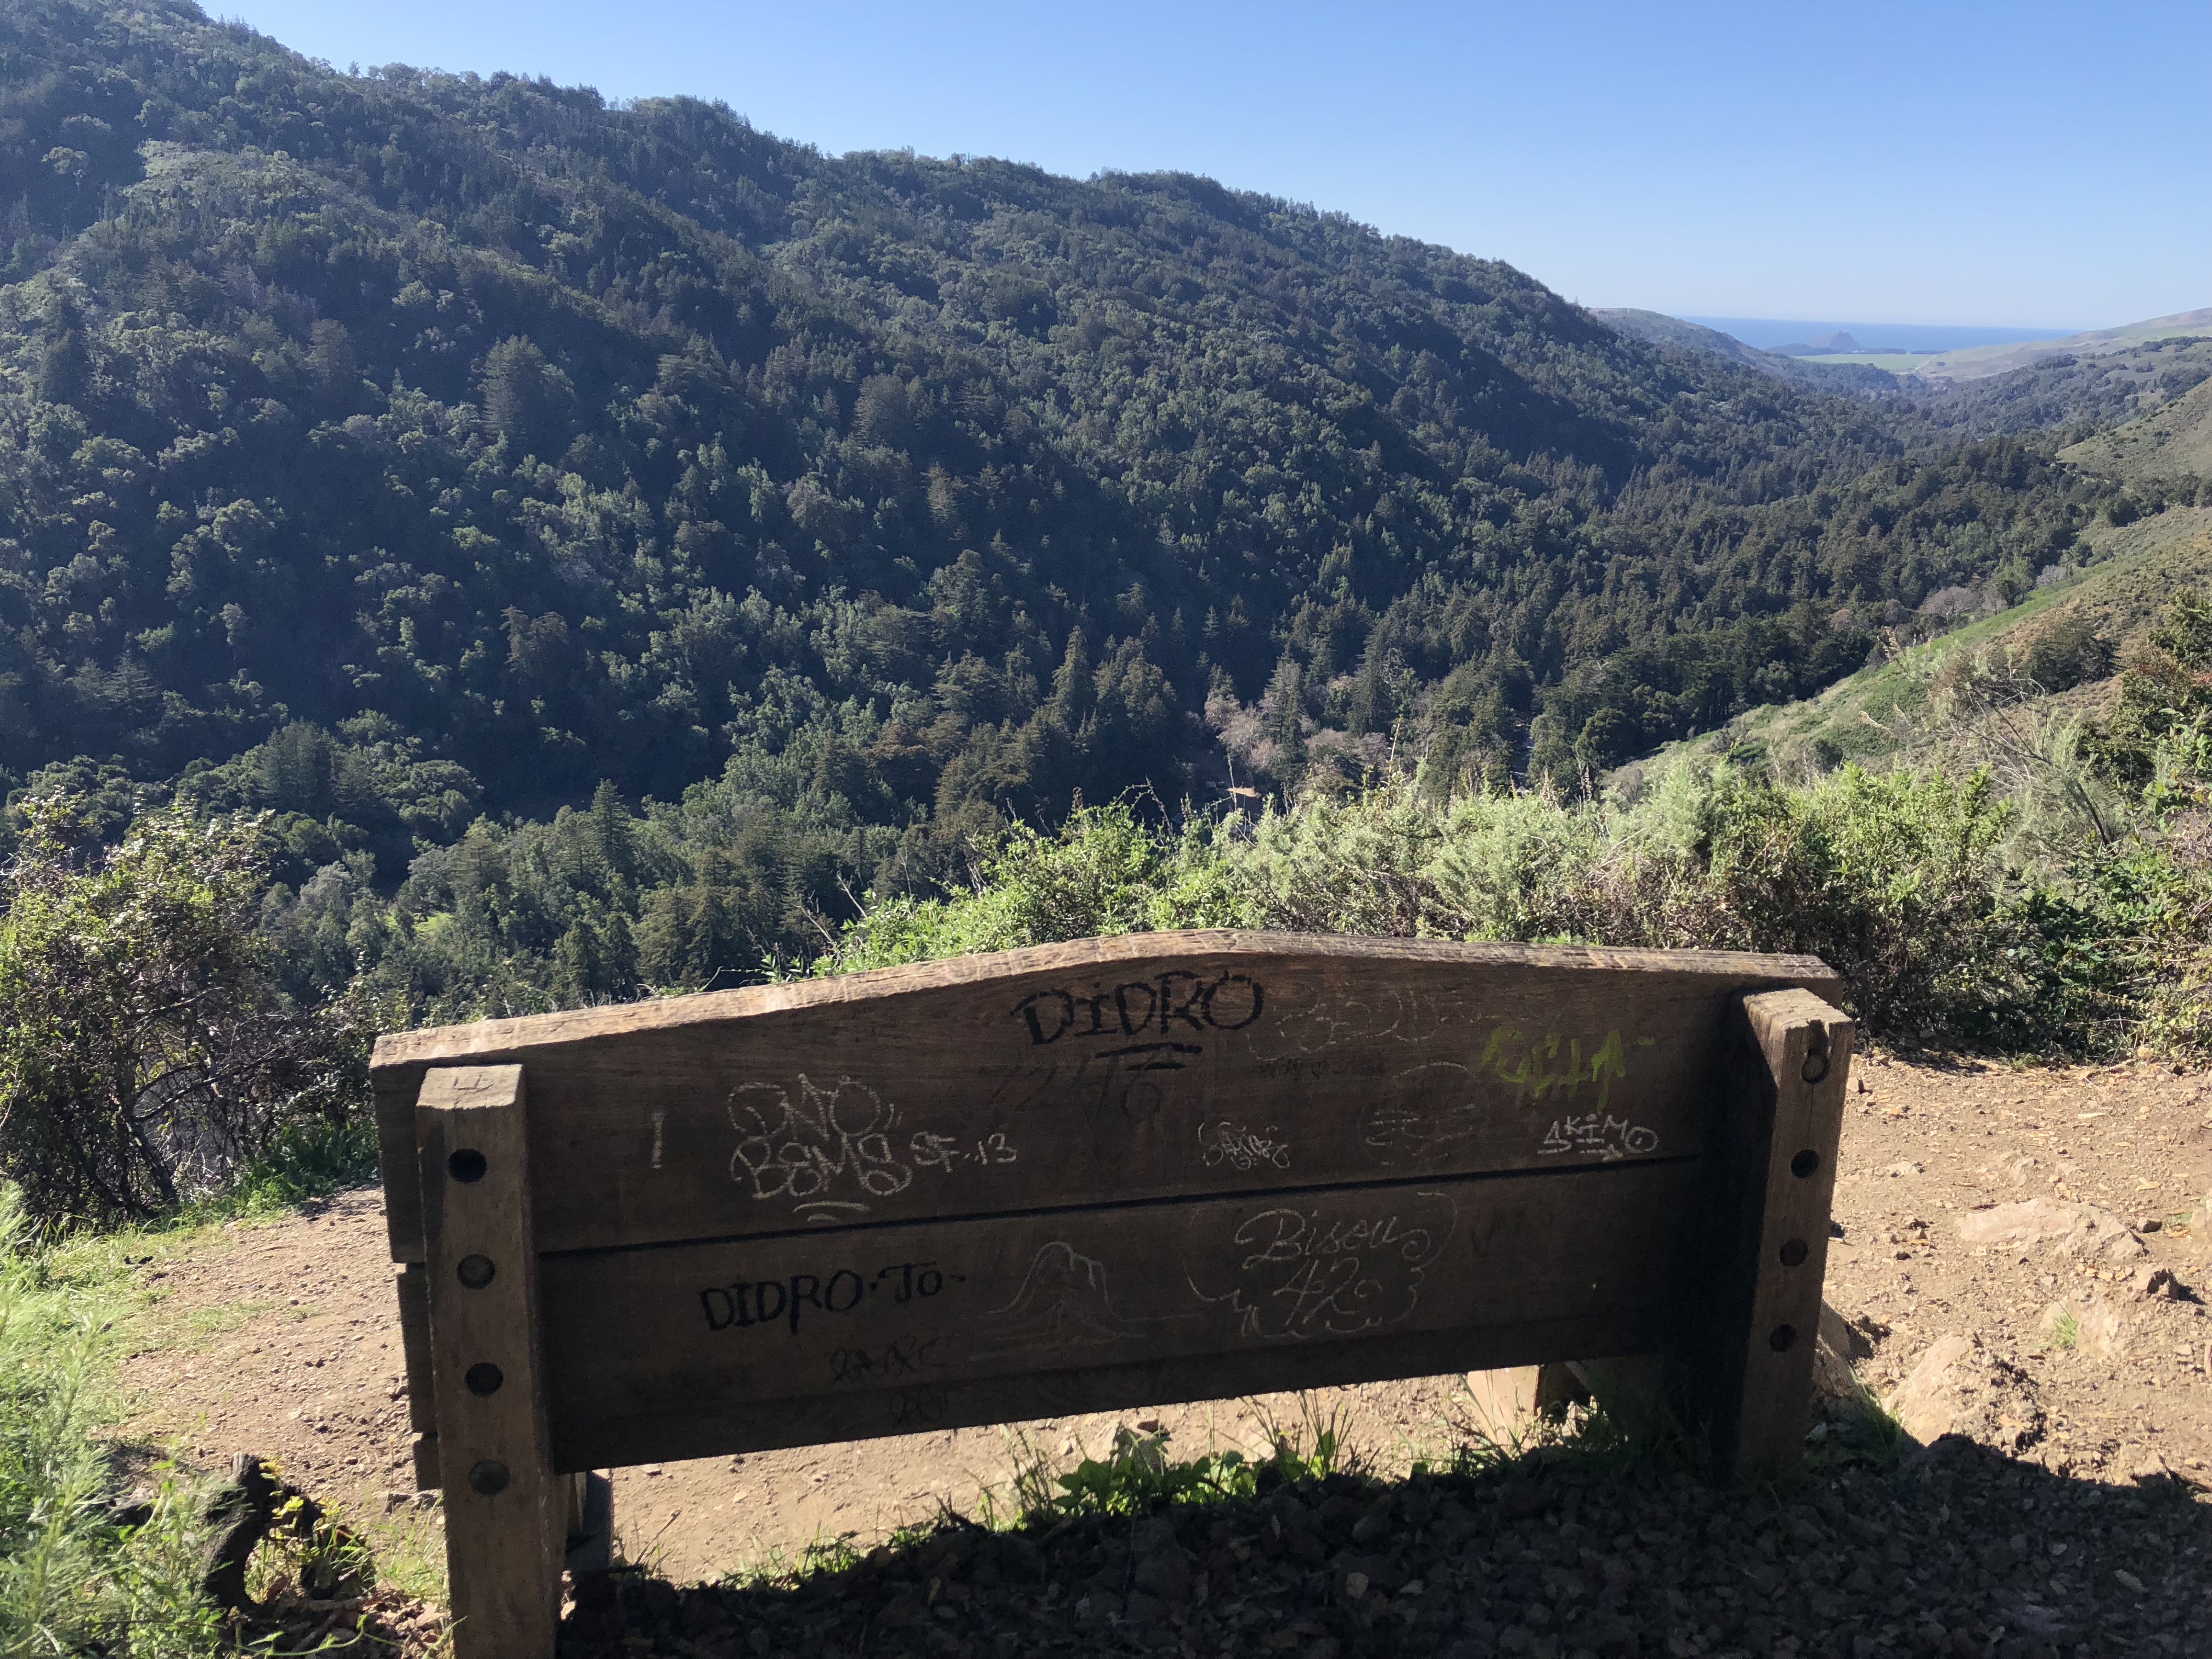 The view from Valley View Trail